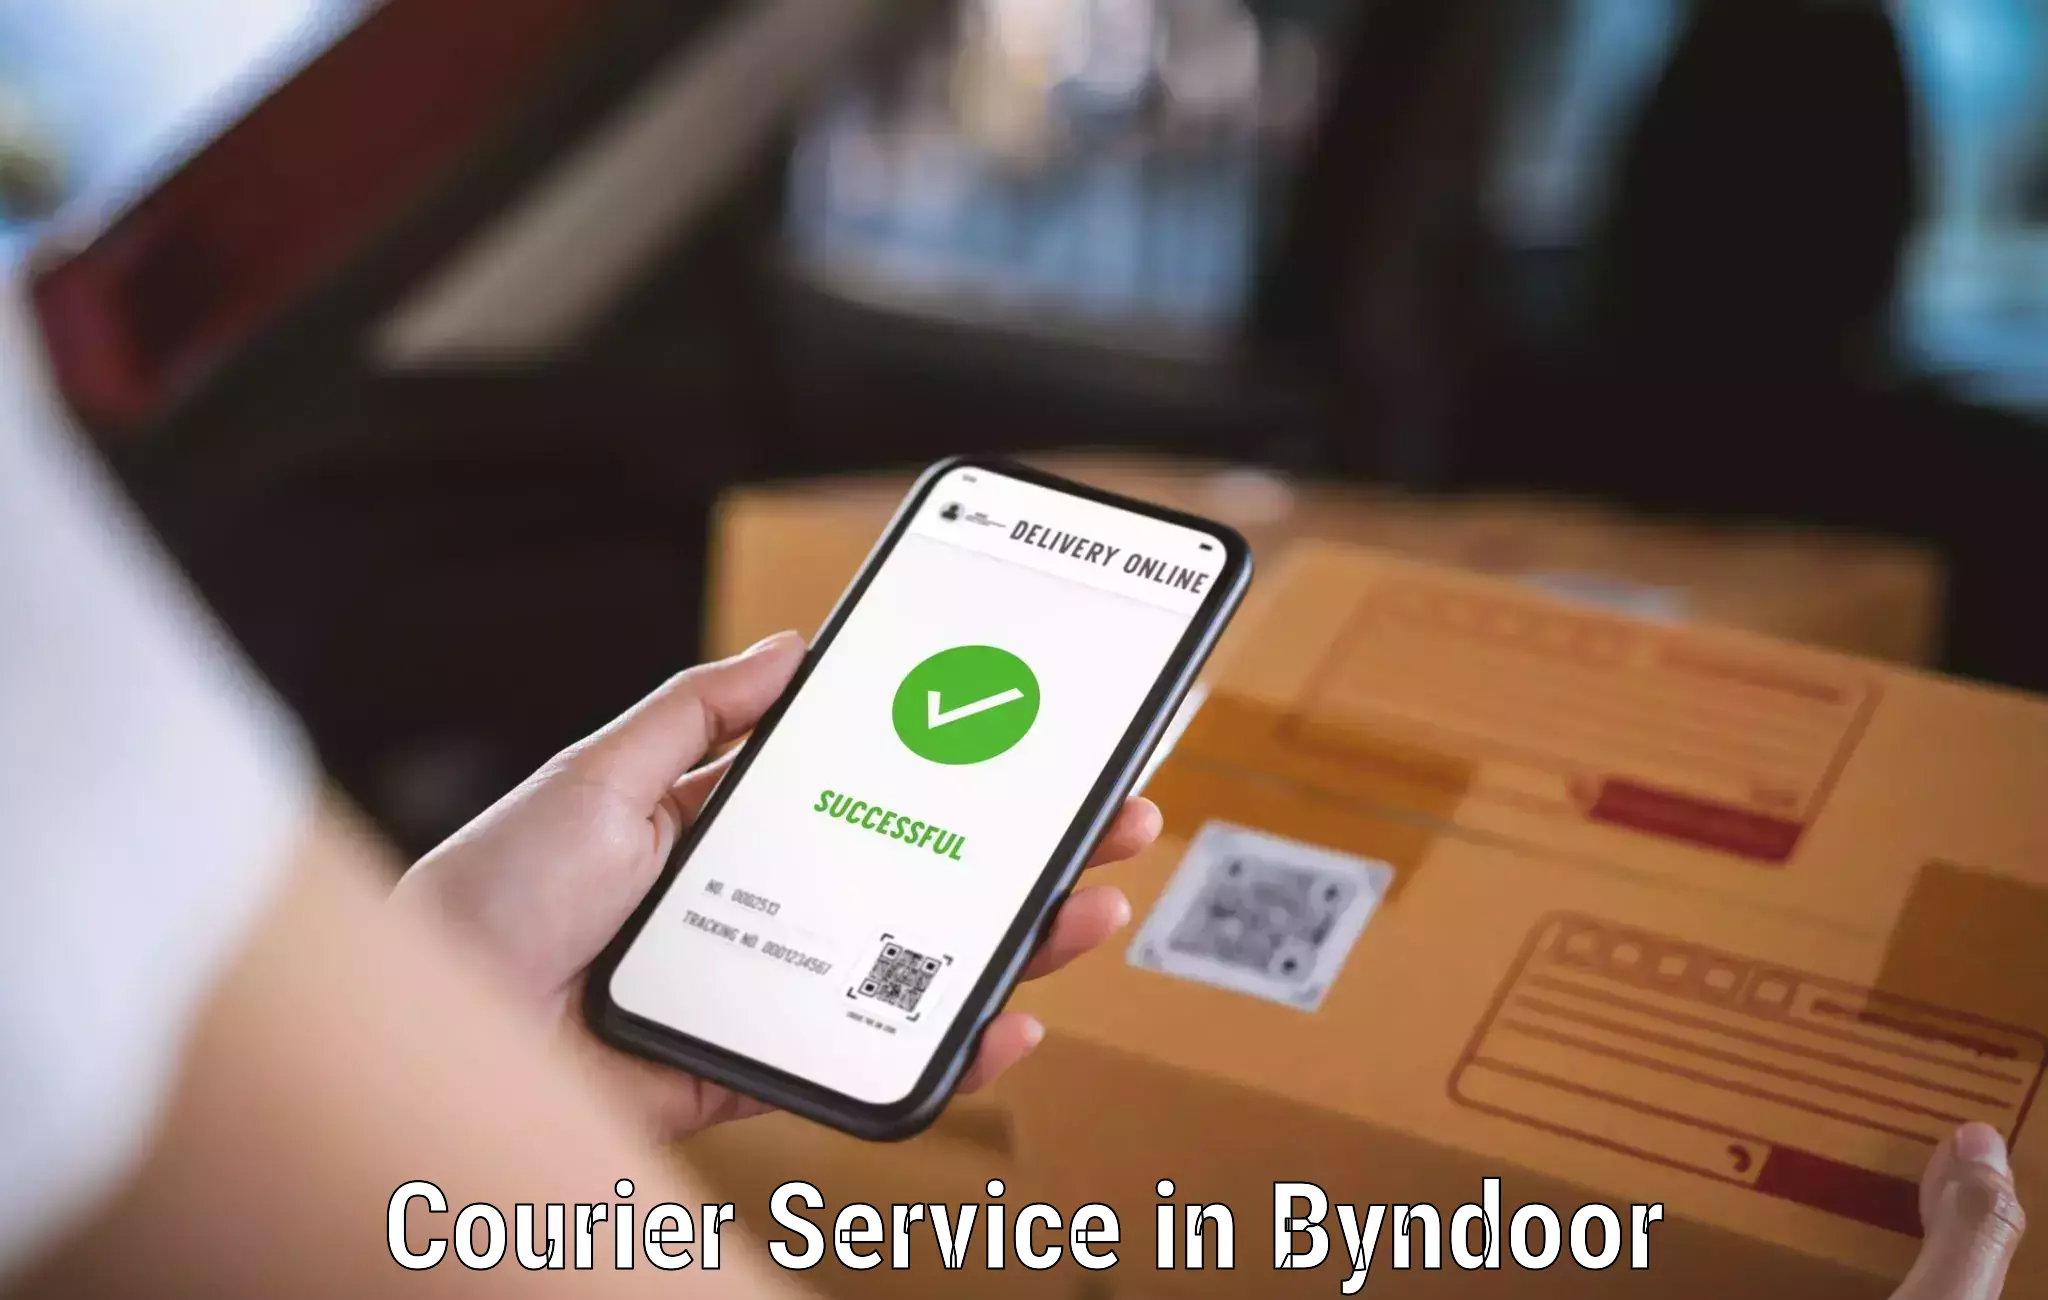 Overnight delivery in Byndoor